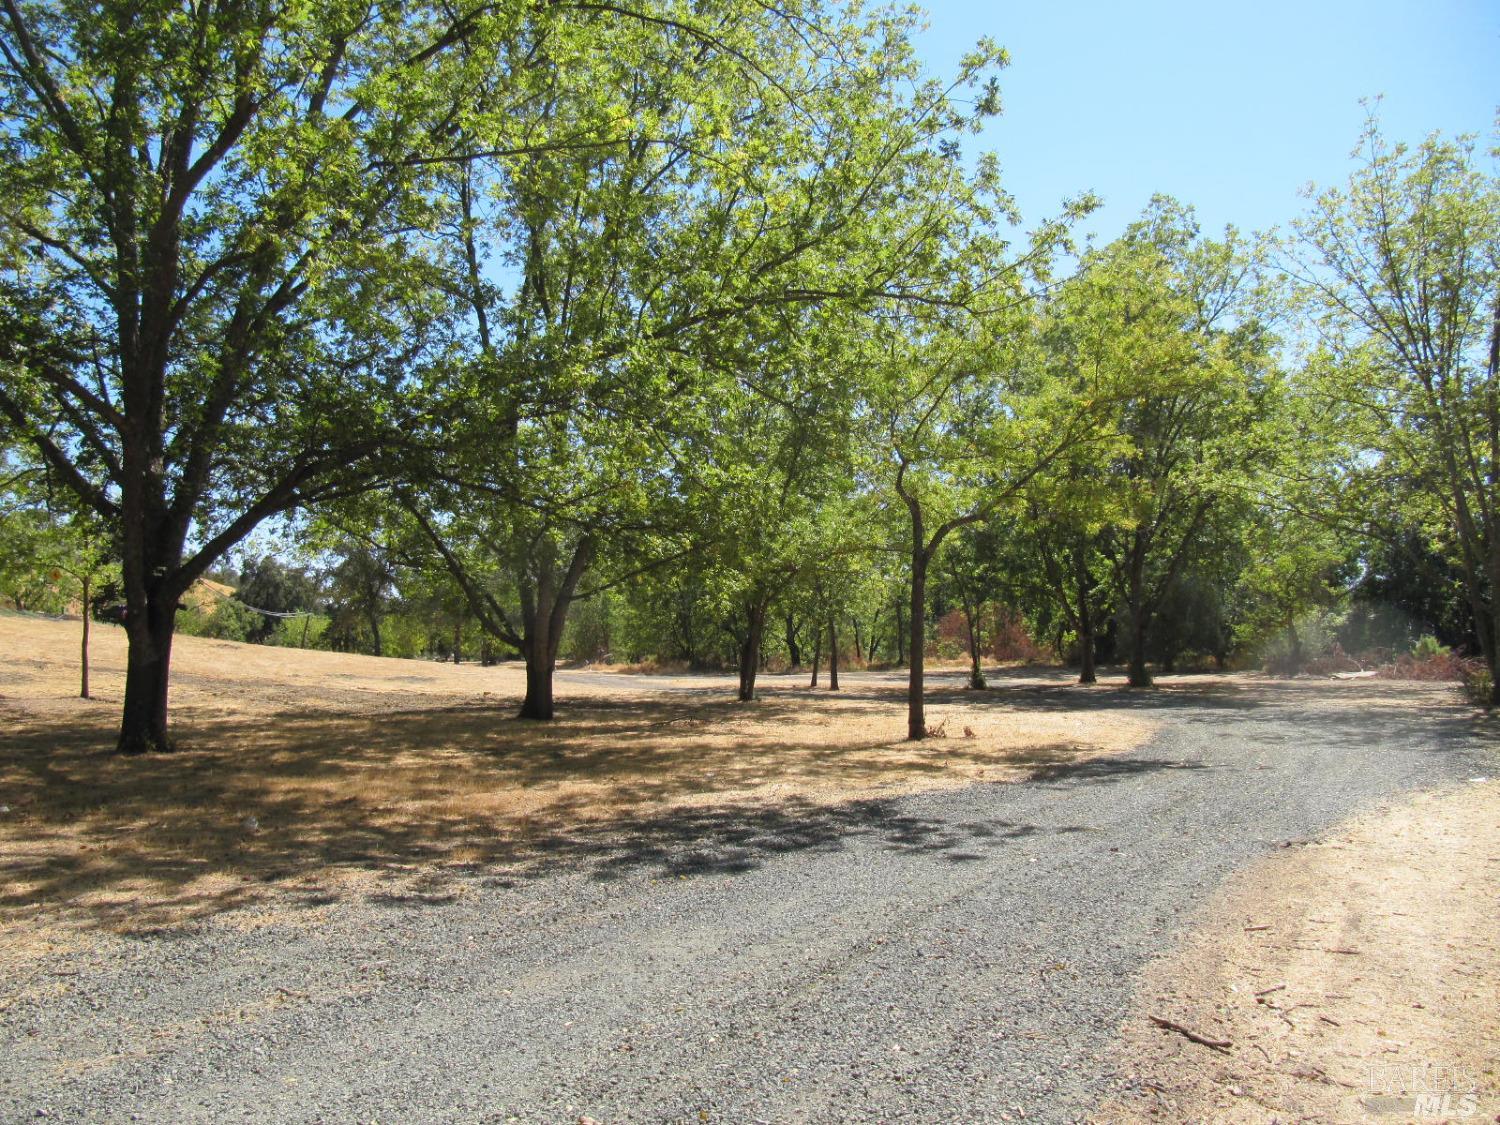 a view of empty space with large trees